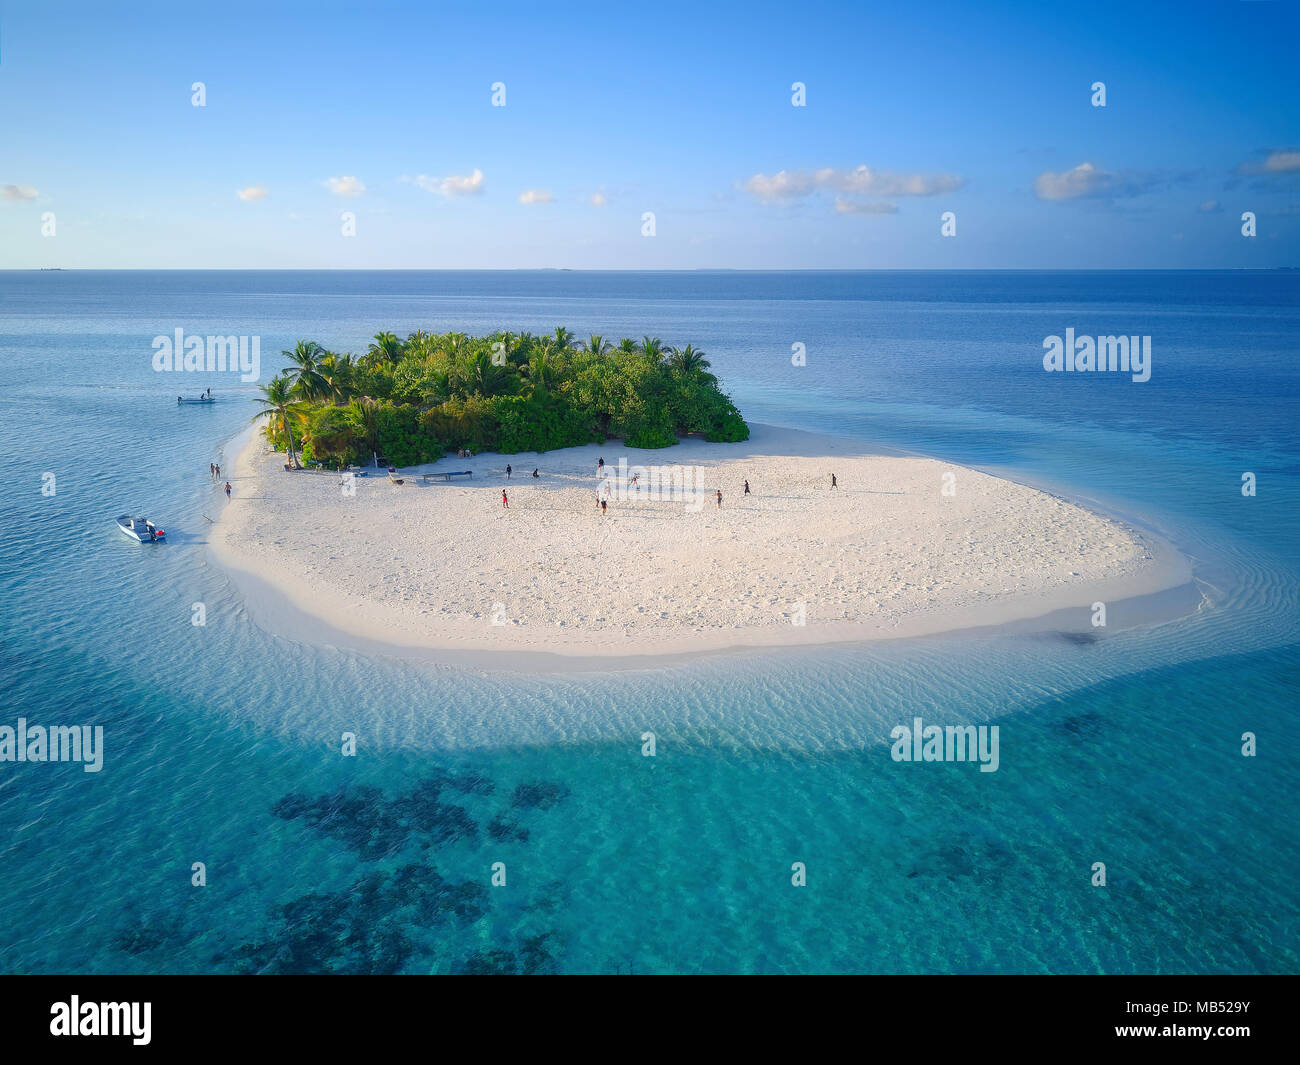 Uninhabited island for day trips with palm trees, bushes, sandy beach all around, offshore coral reef, Ari atoll, Indian Ocean Stock Photo